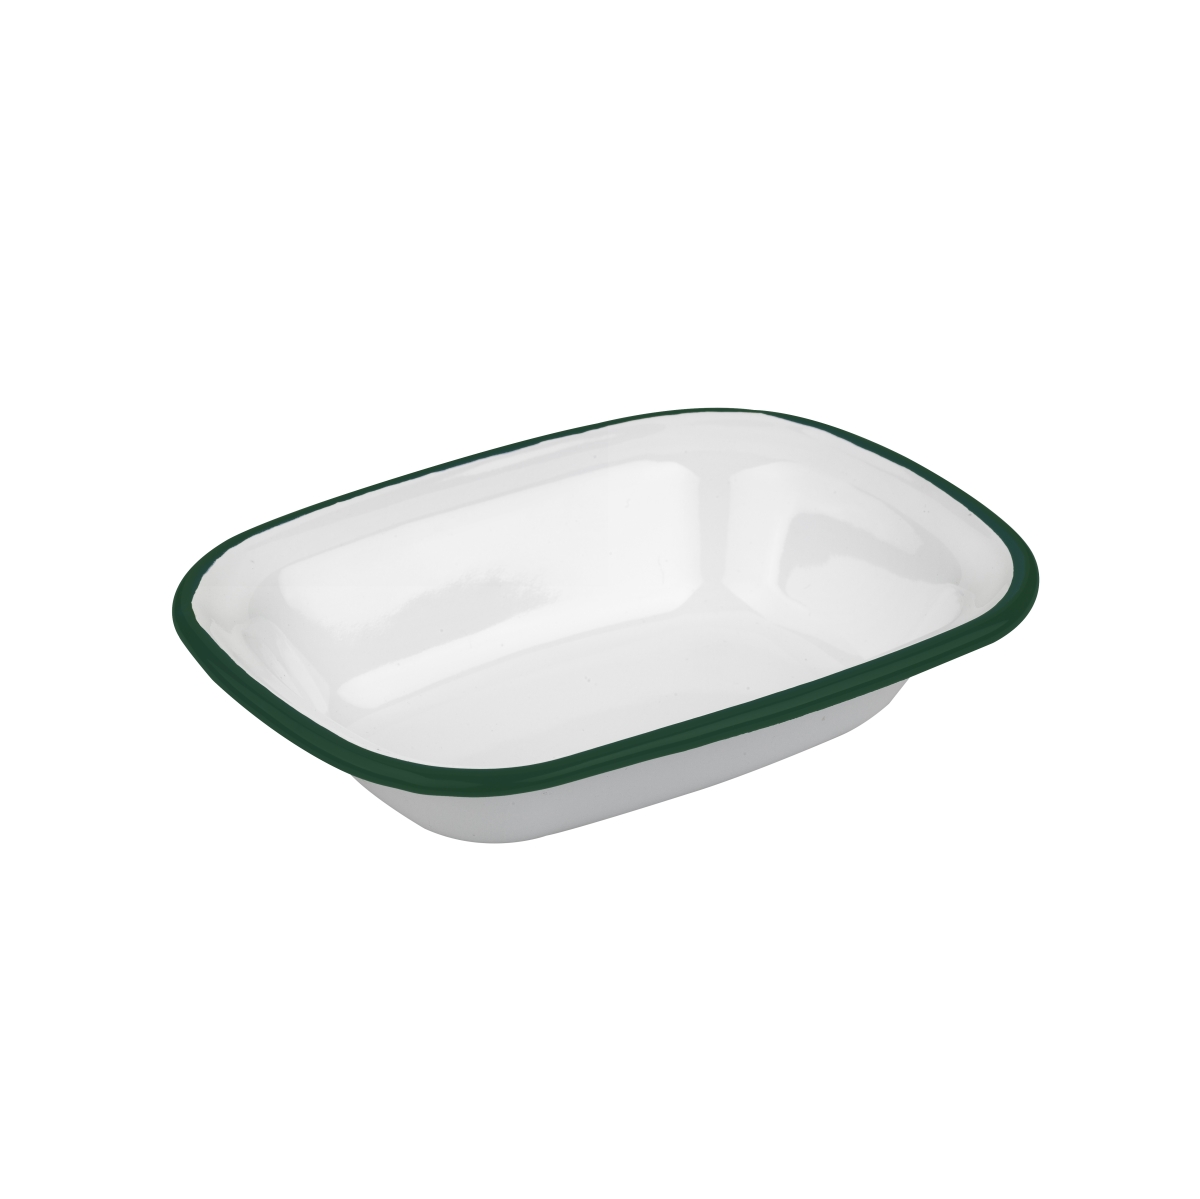 Picture of Packnwood 294ENBQ1813 7.1 x 5.1 x 1.6 in. 12 oz Rim Enamel Deep Dish, White with Green - 12 Piece